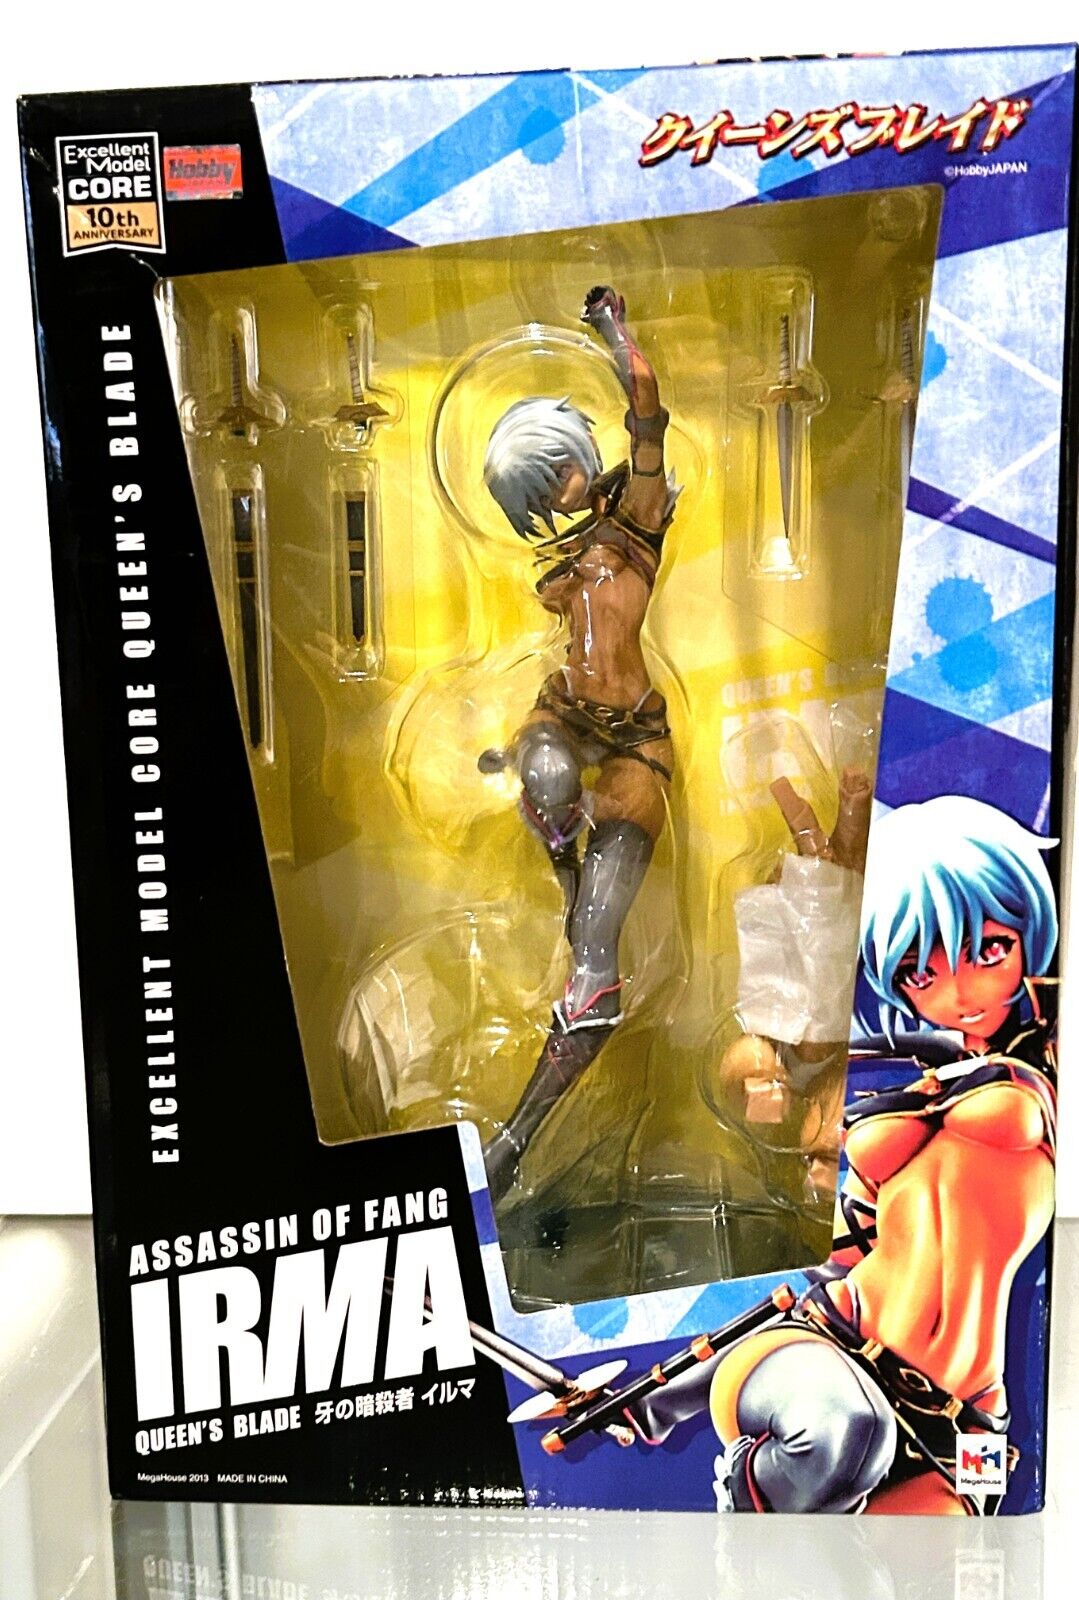 Excellent Model Core Queen's Blade Assassin of Fang Irma Anime Figure Megahouse